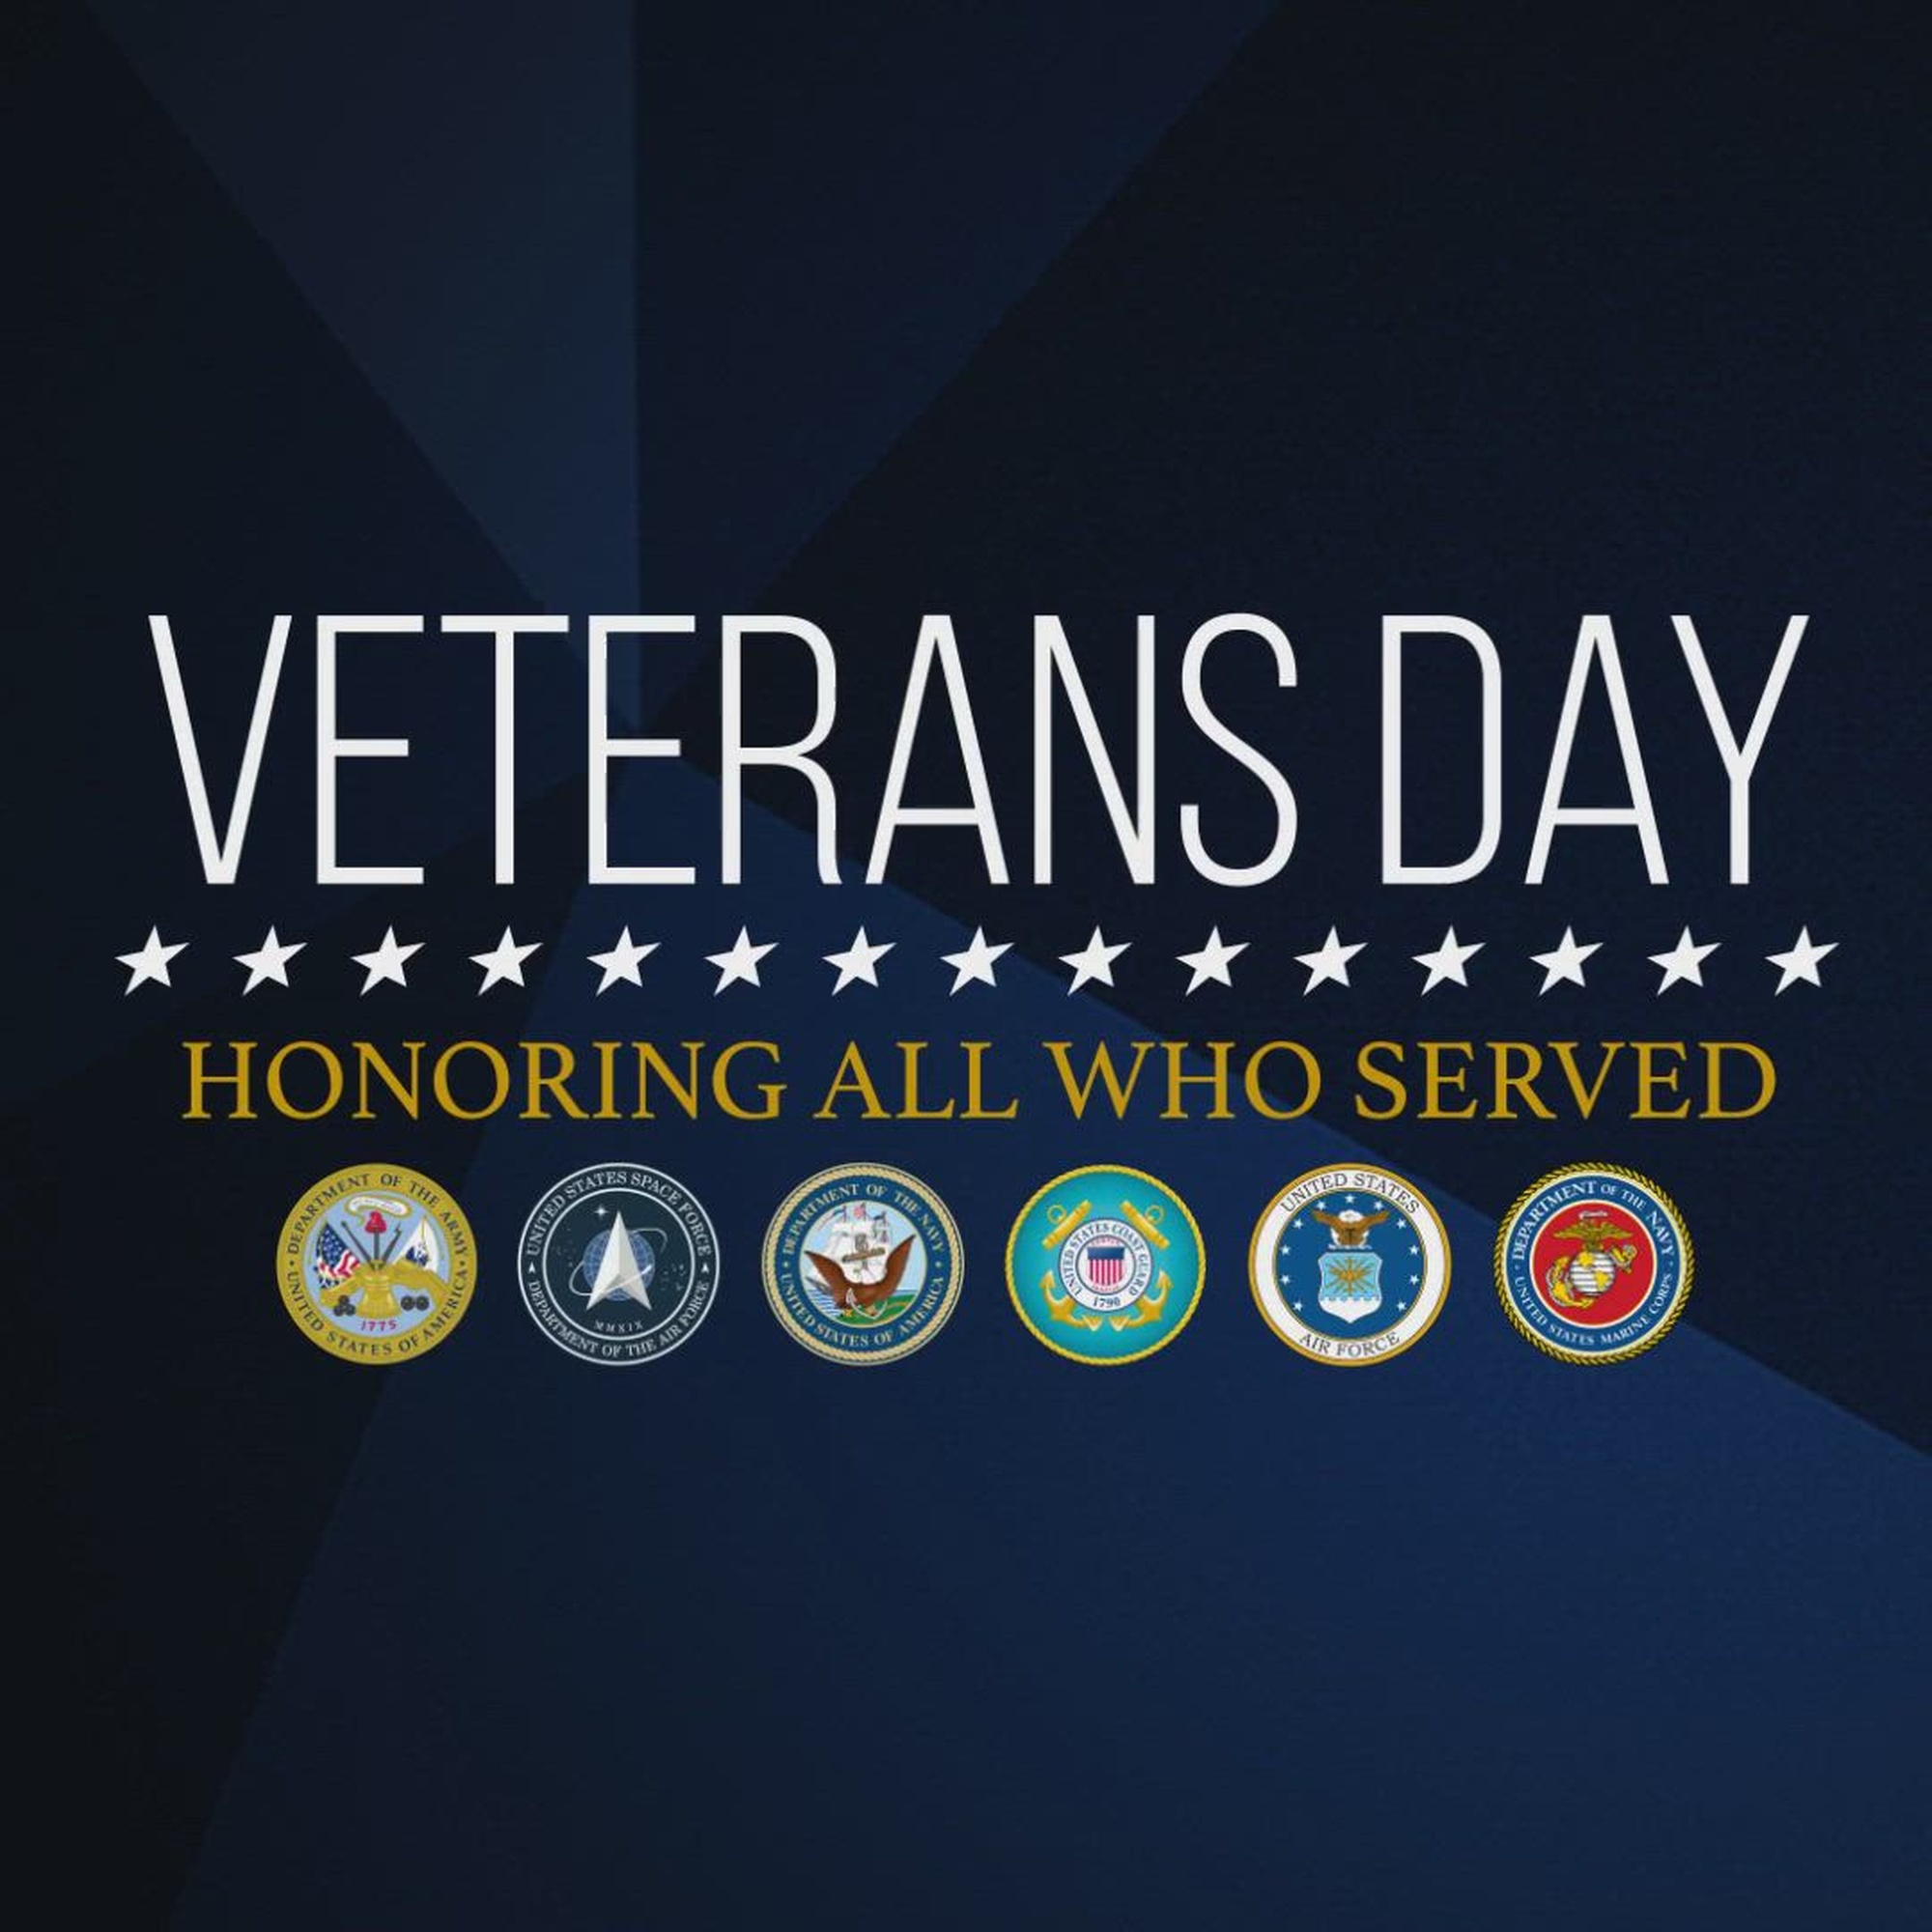 In addition to United States Army Space and Missile Defense Command's 2,000 service members, about 74% of its civilian workforce, as well as many contractors, has served in the armed forces. Today we honor all of our service members and veterans and thank them for their sacrifice. Happy Veterans Day!